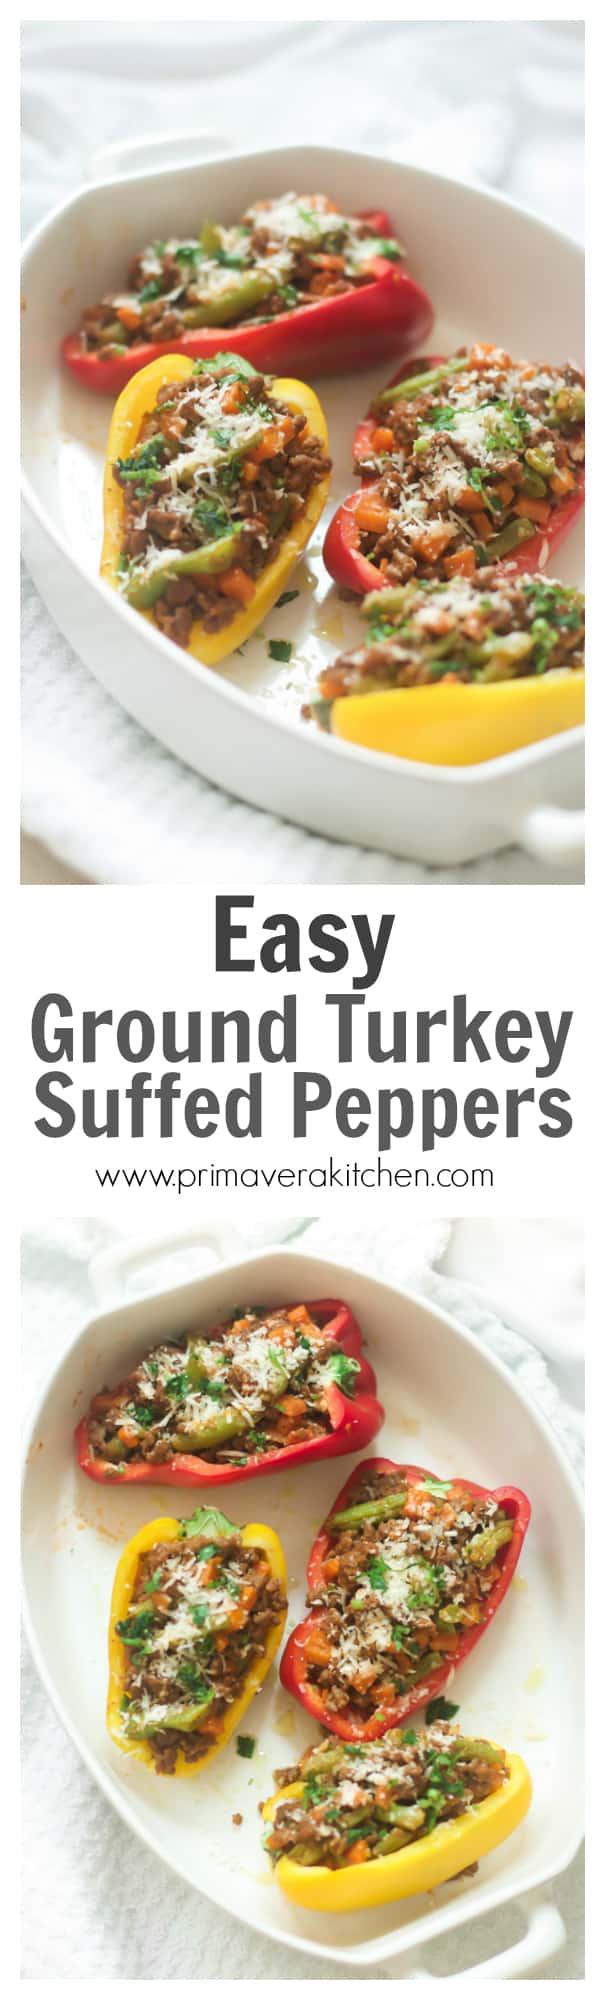 Easy Ground Turkey Stuffed Peppers - This Easy Ground Turkey Stuffed Peppers recipe is low-carb, gluten-free and super easy and quick to make! Enjoy!